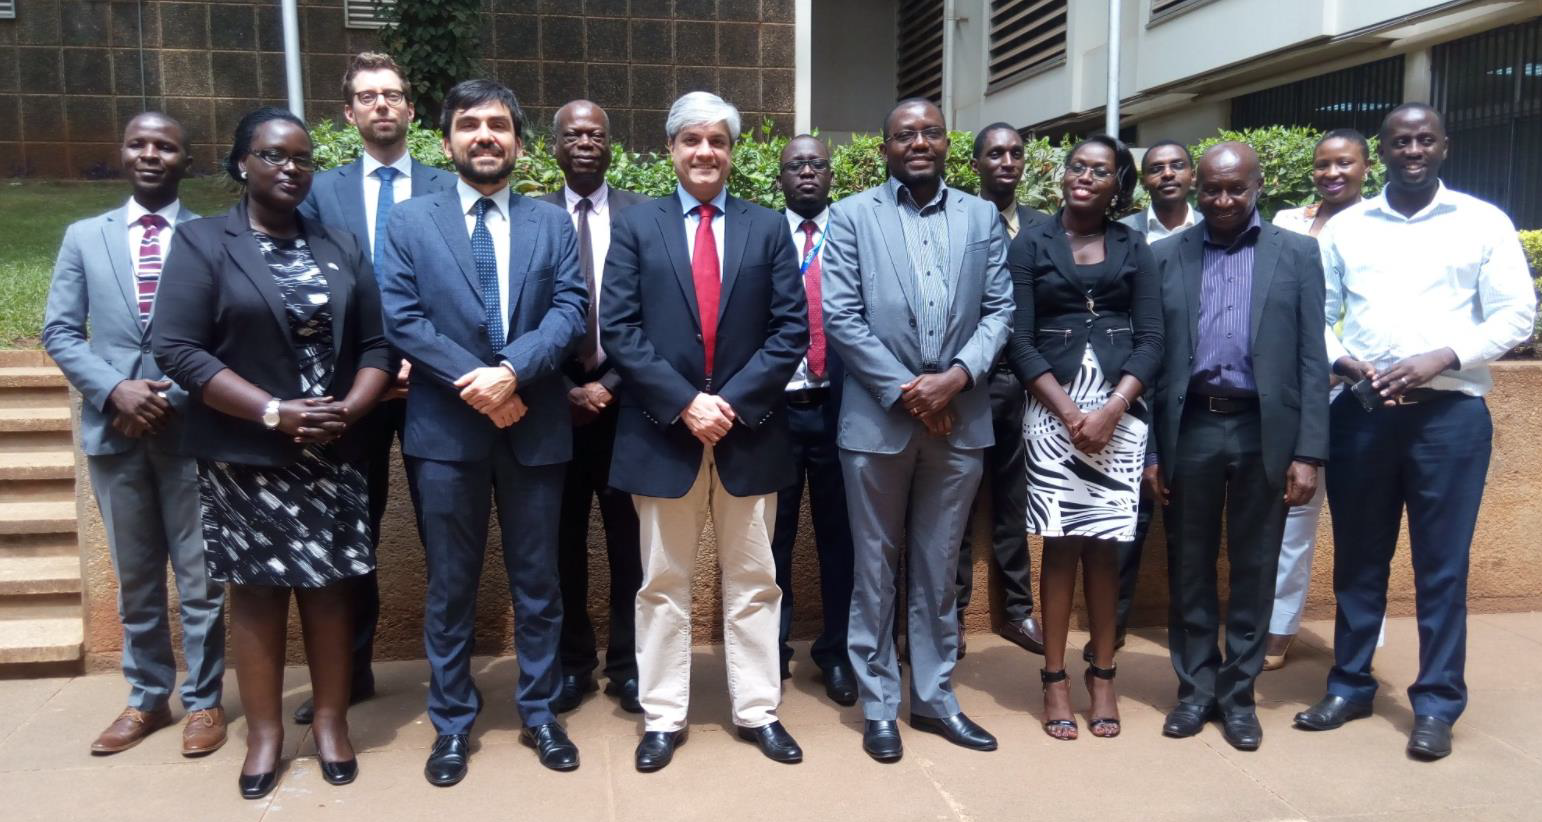 Council of Europe, NITA, DPP, Uganda Police Force, Ministry of ICT & National Guidance and Ministry of Foreign Affairs pose for picture.